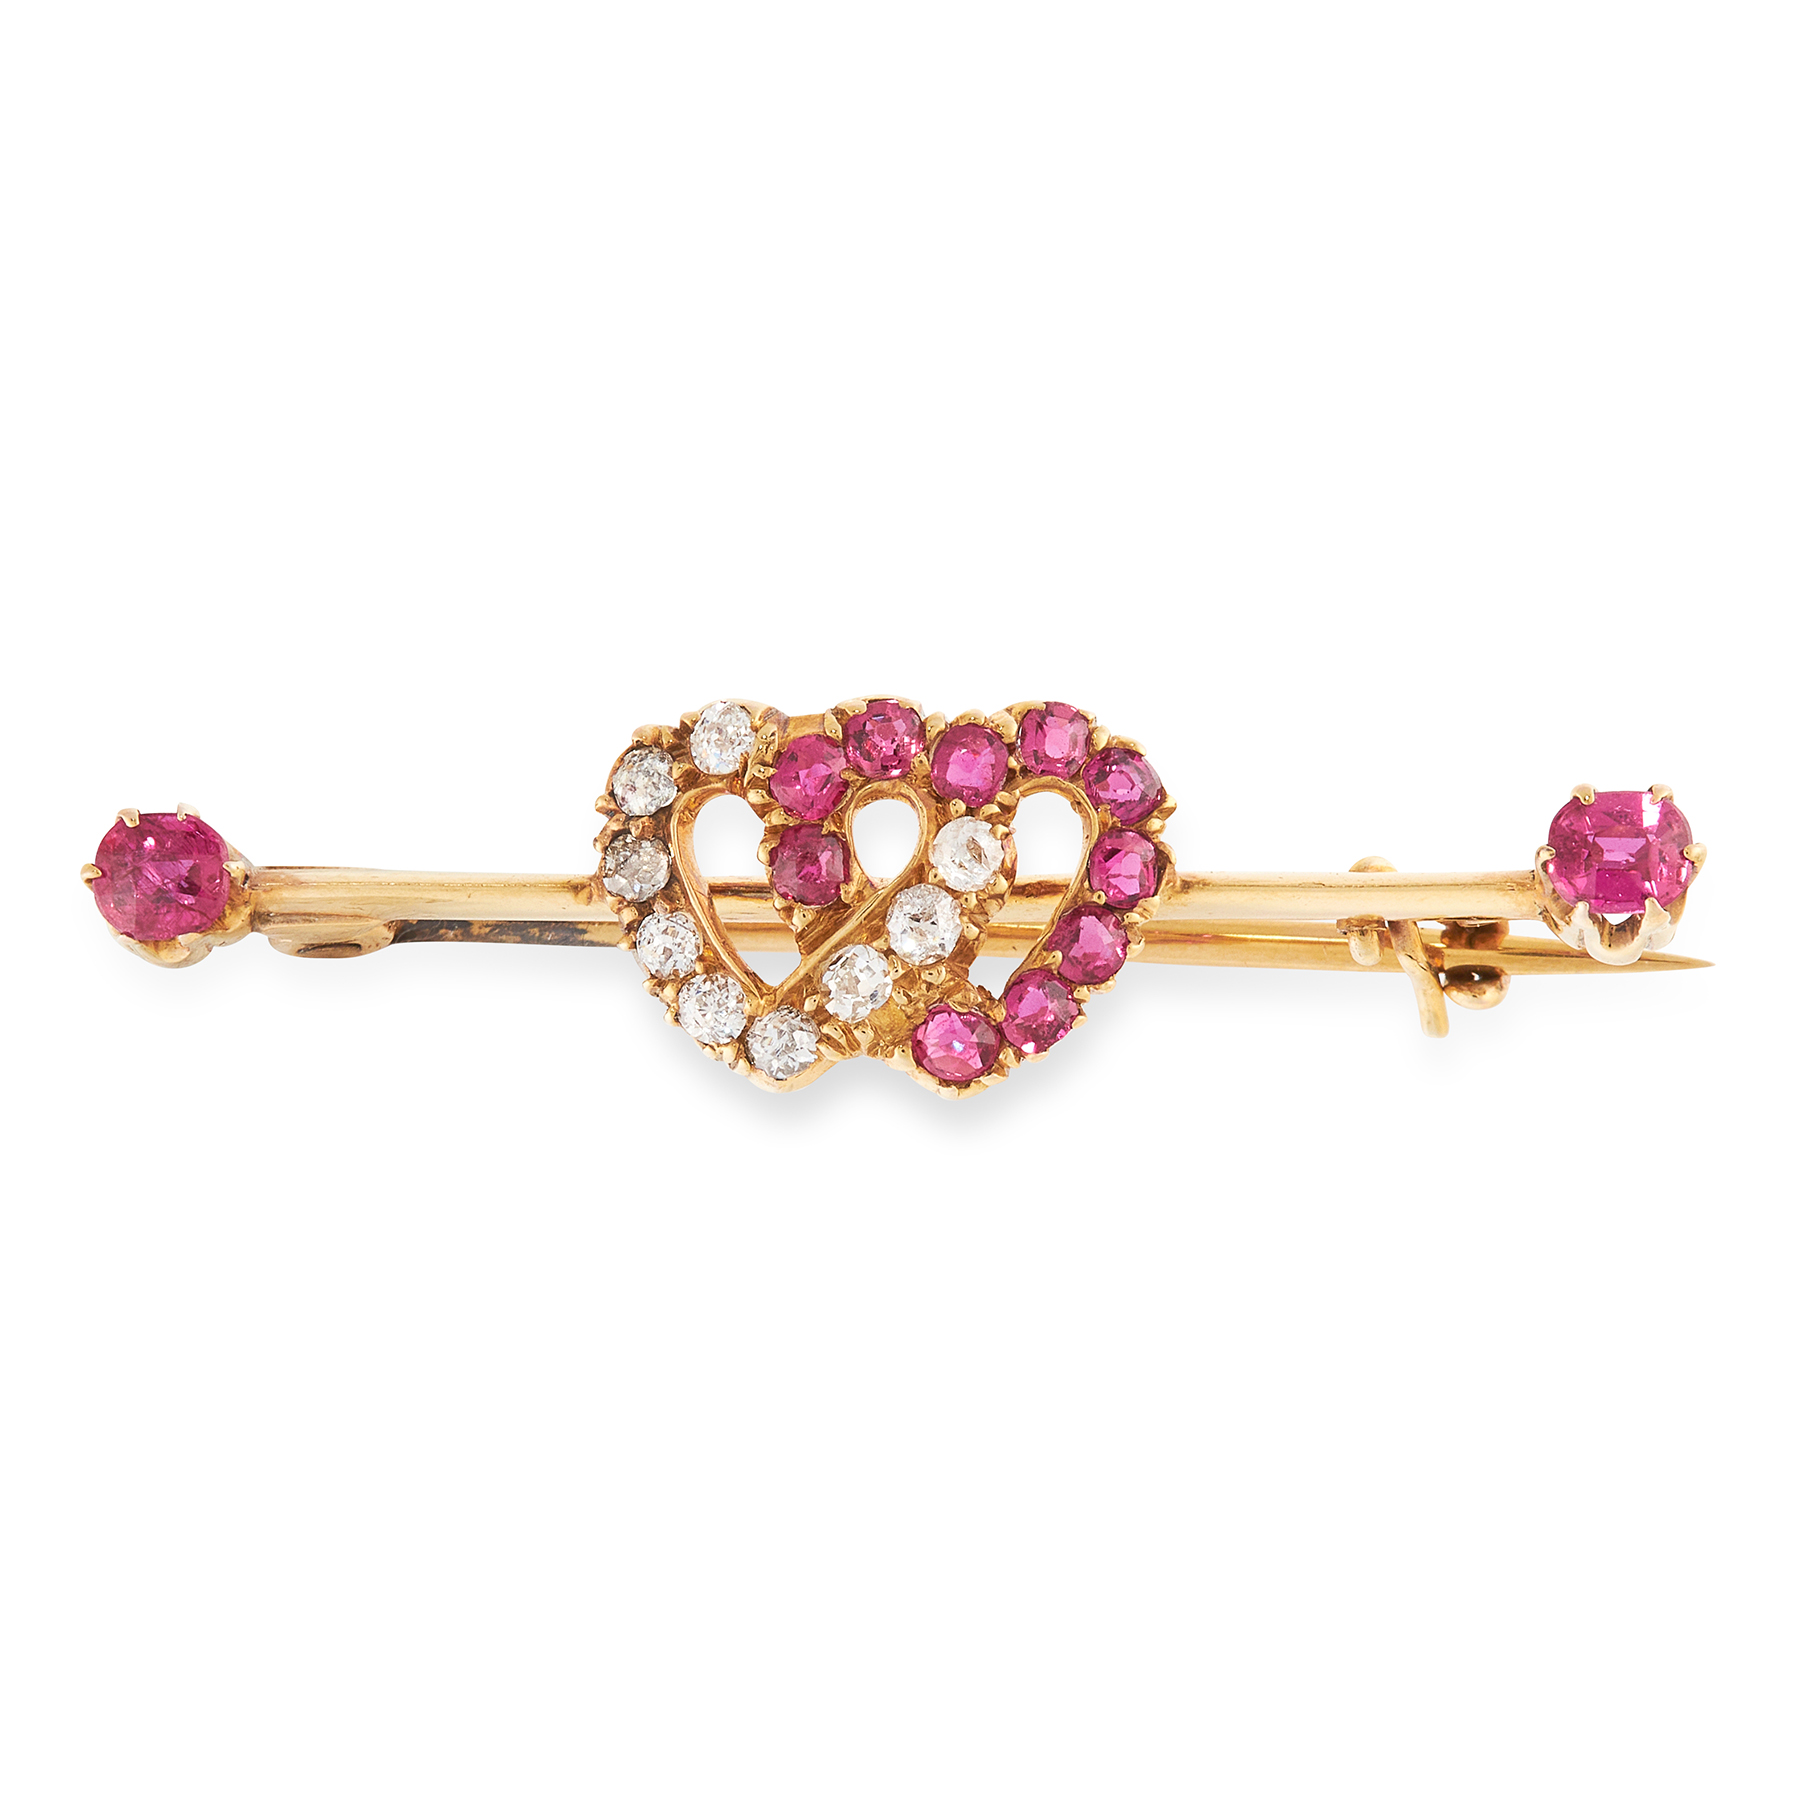 AN ANTIQUE DIAMOND AND RUBY HEART BROOCH in yellow gold, in the form of two intwined hearts set with